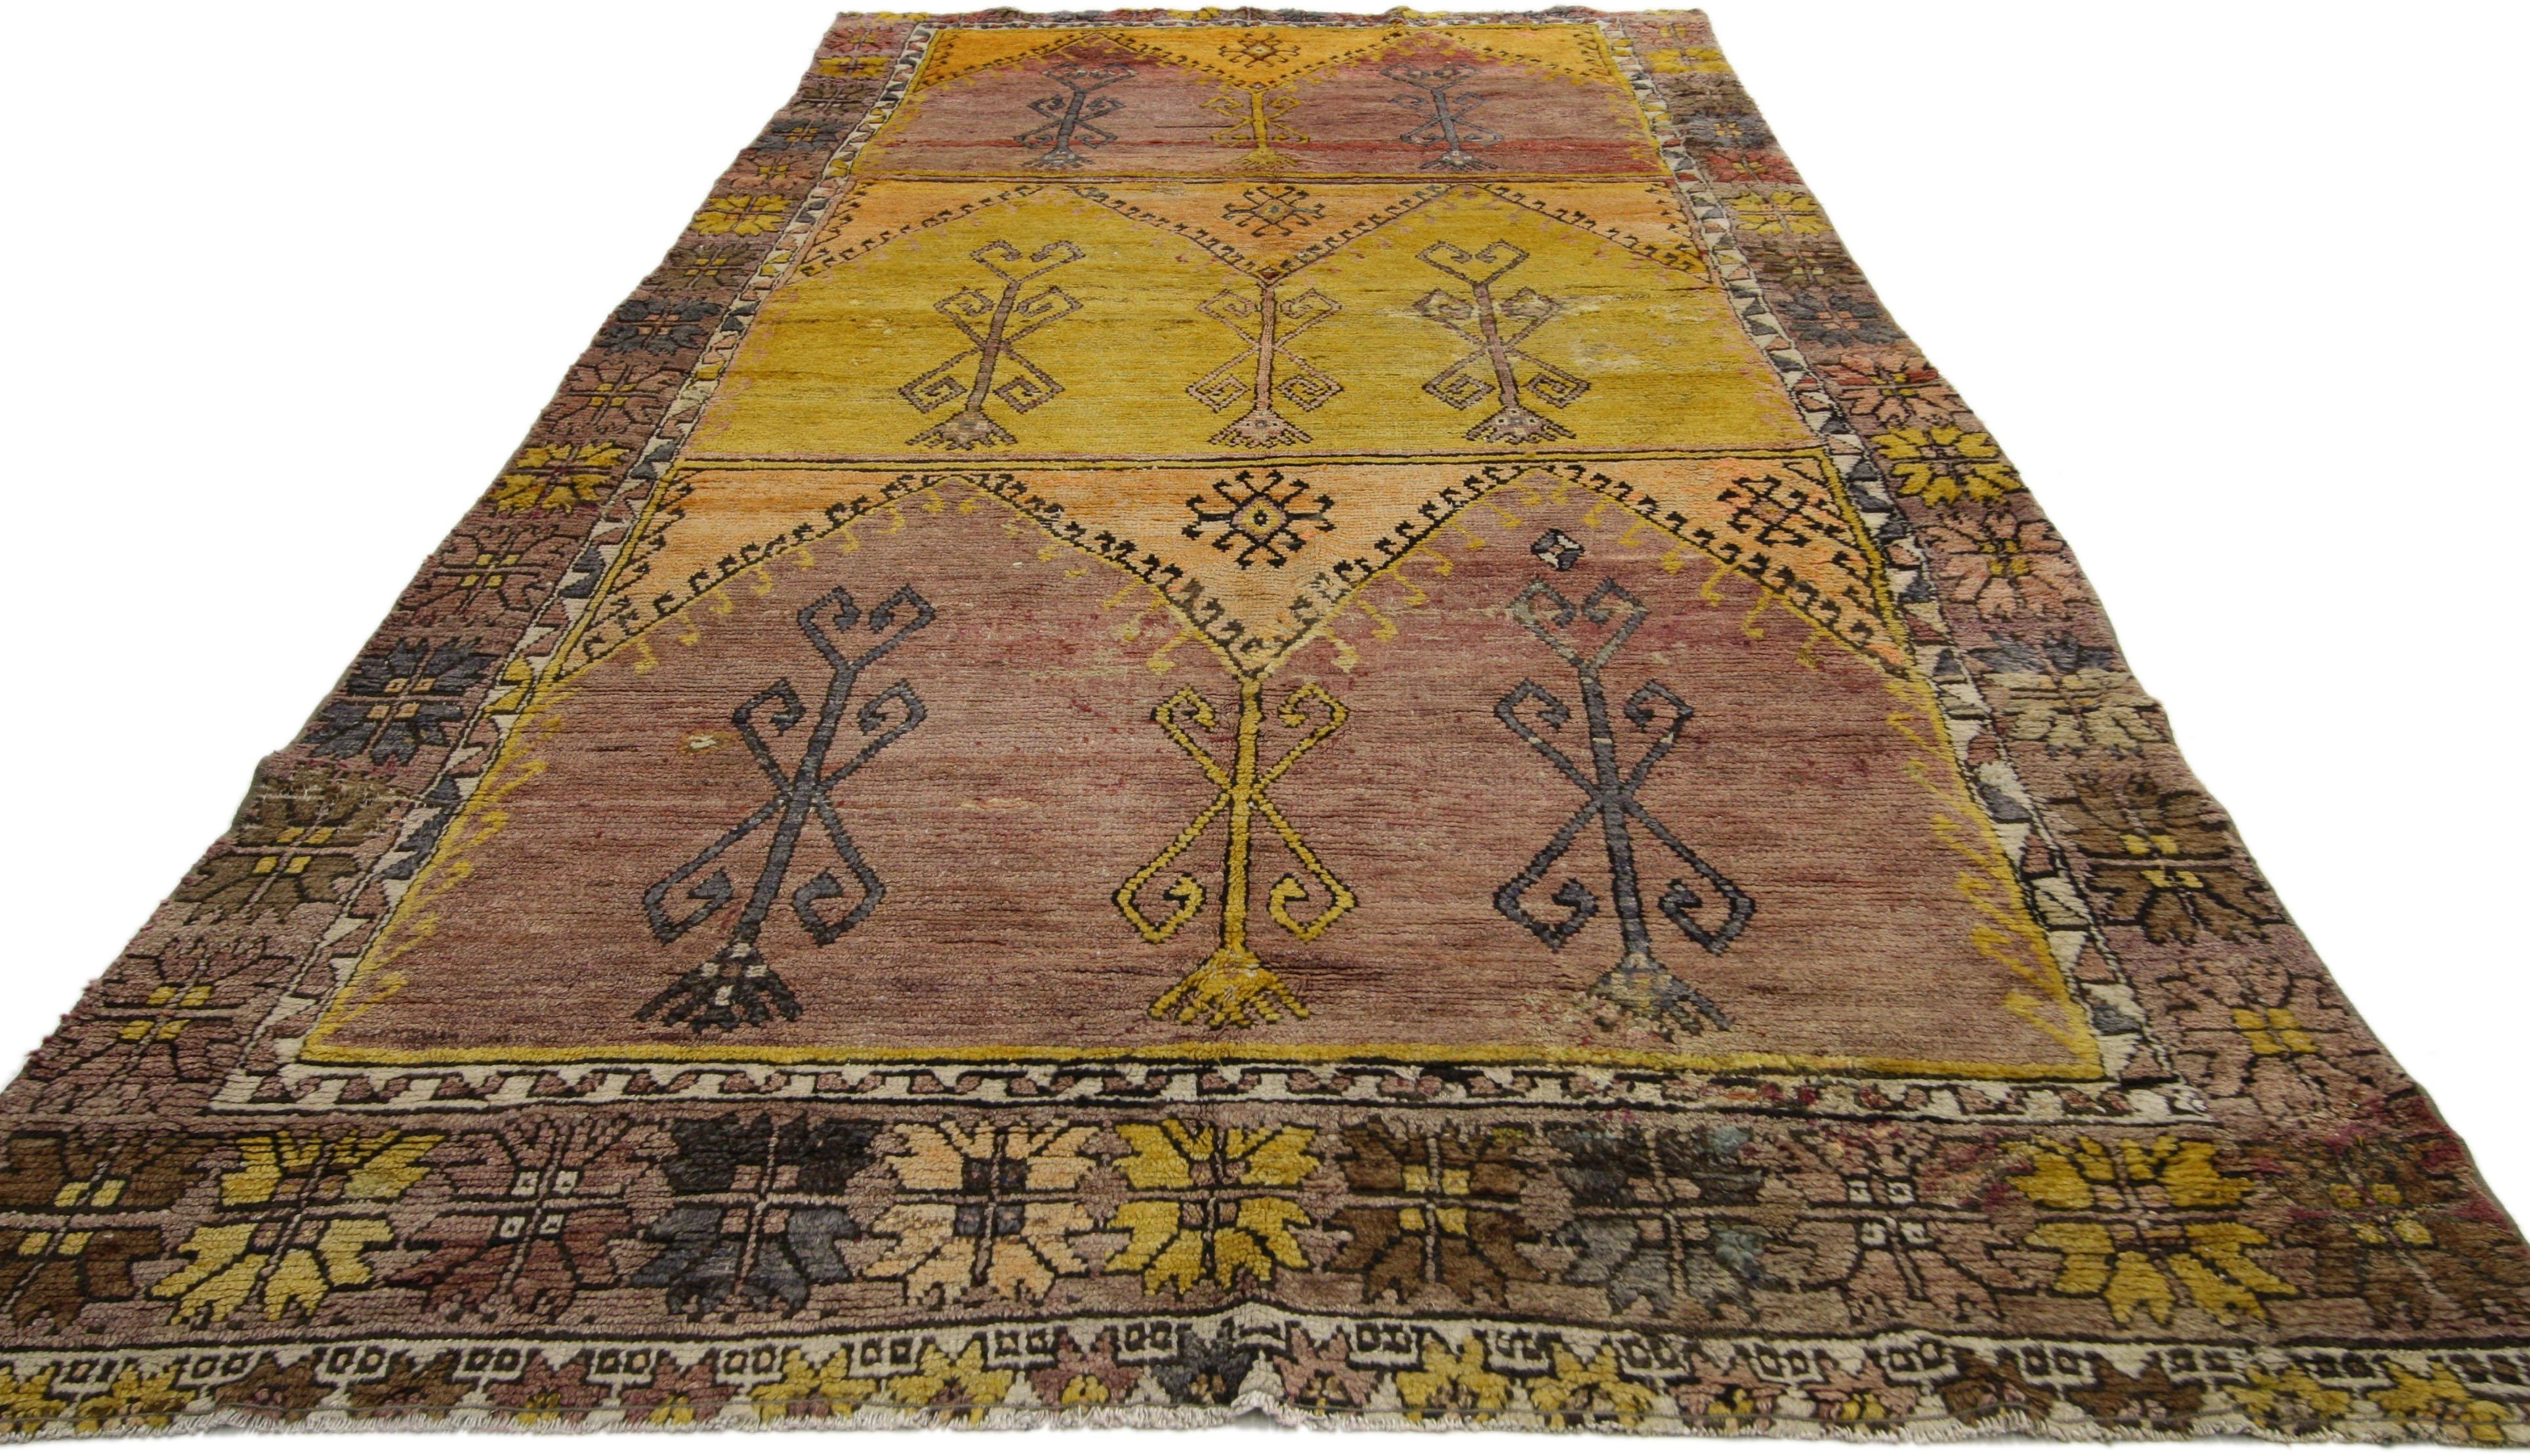 52290 Vintage Turkish Oushak Gallery Rug with Tribal Style, Wide Hallway Runner 04'08 x 10'06. This hand-knotted vintage Turkish Oushak runner with tribal style features three compartments each filled with a double mihrab niche with latch hook